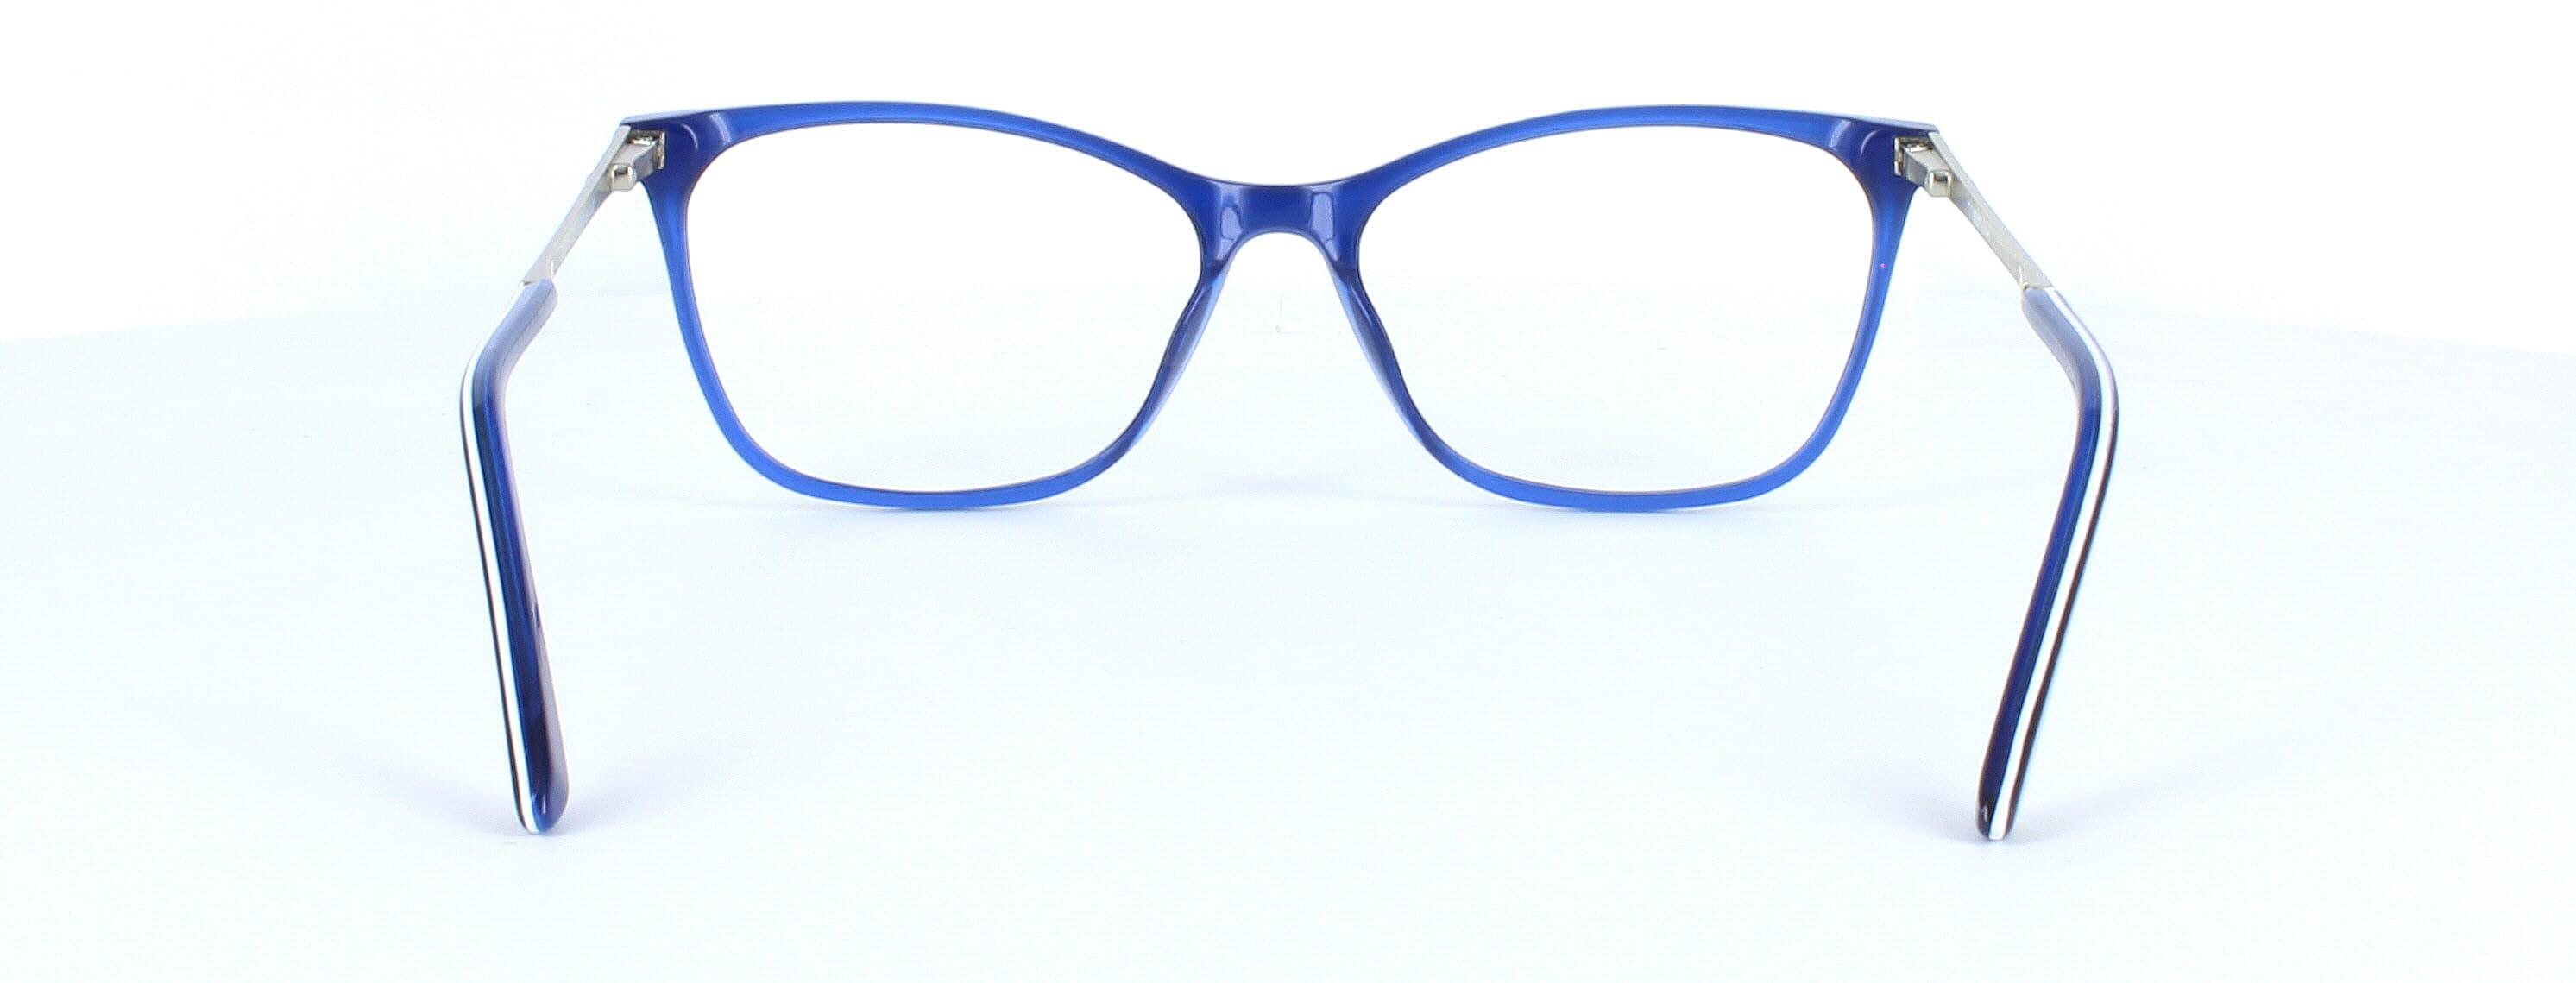 Ballina - ladies cat eye shaped acetate glasses here in blue - image view 3